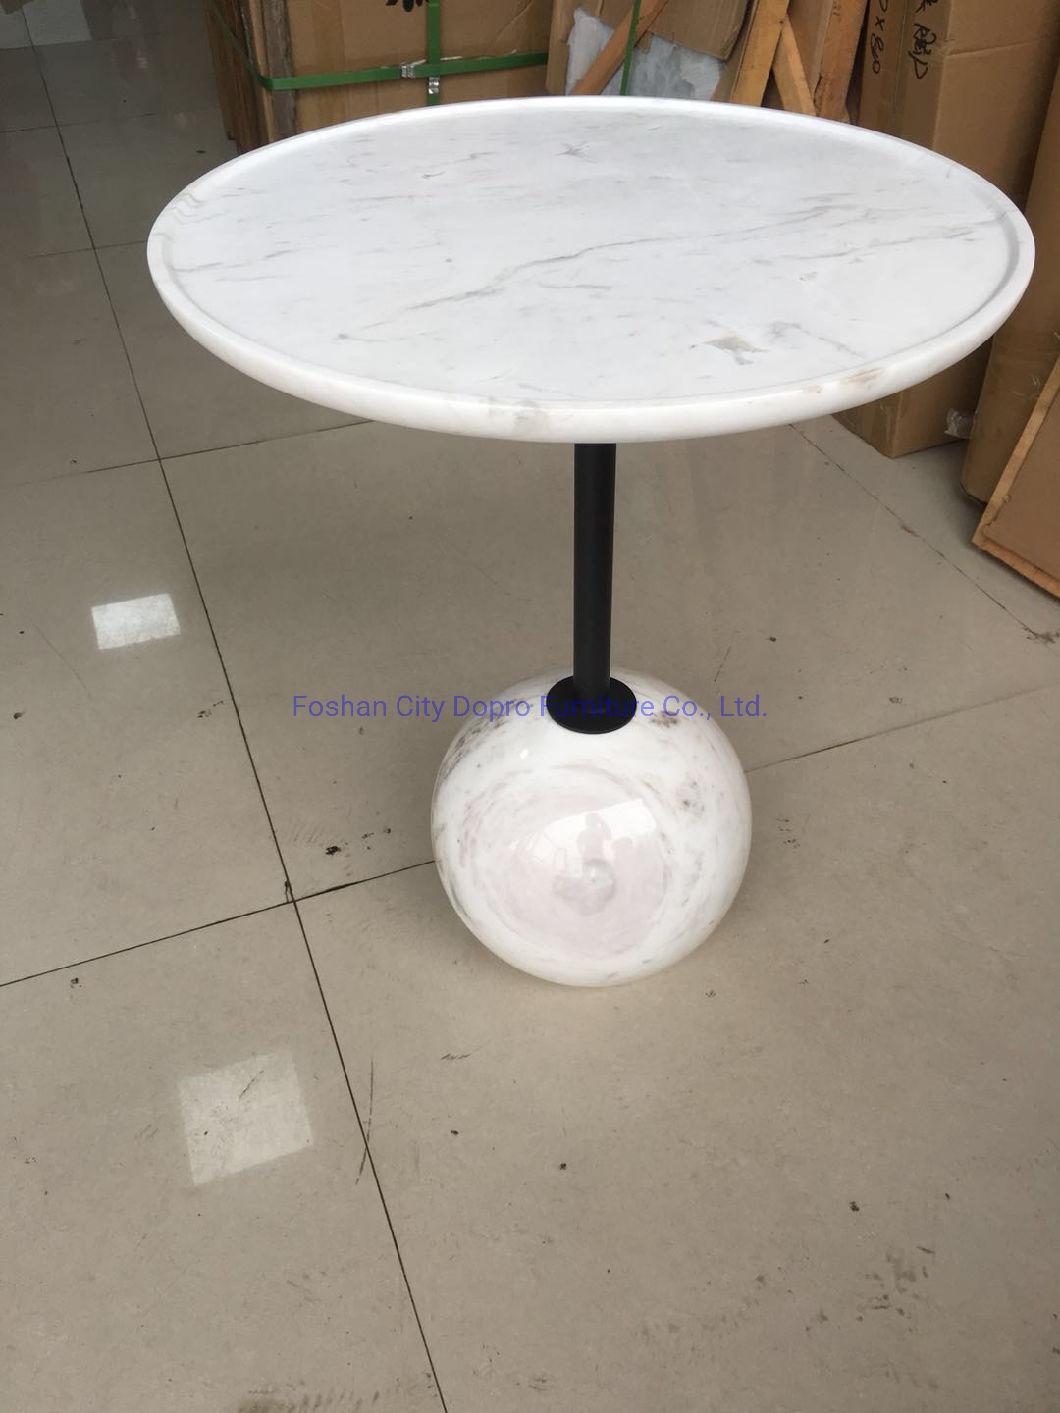 Multi-Styles Little Coffee Table Gold Marble Top